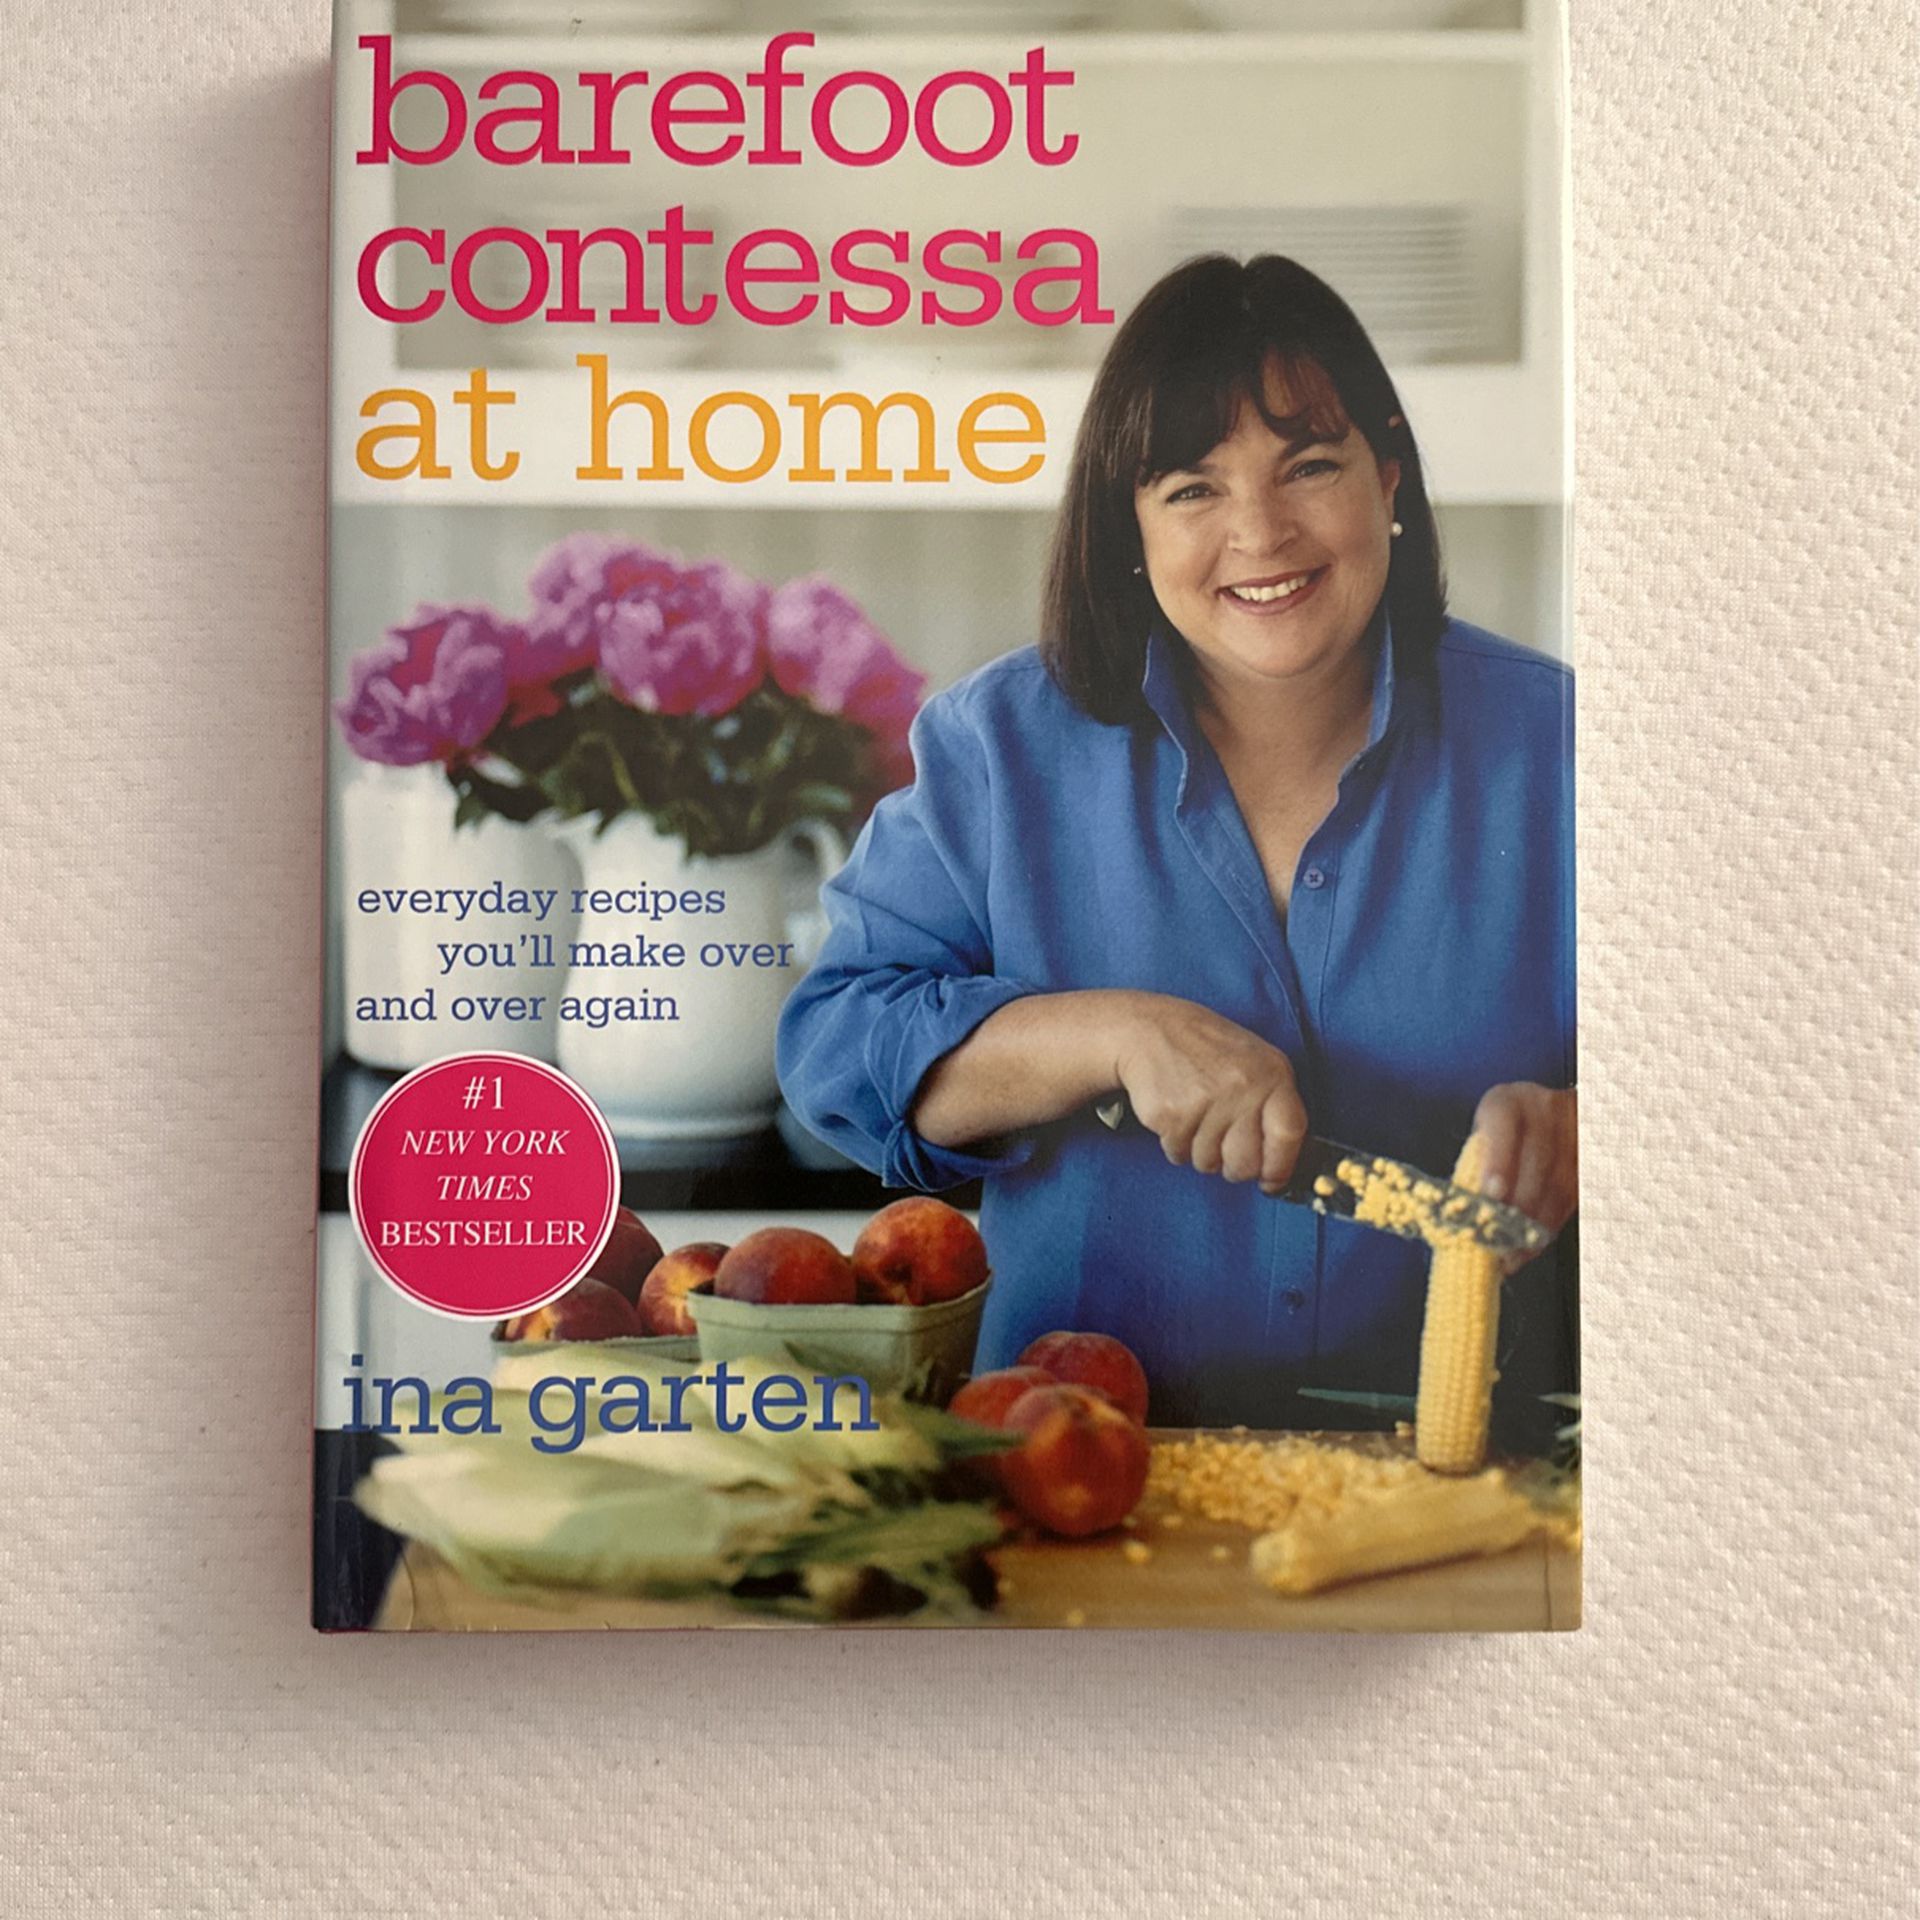 Cookbook - Barefoot Contessa at Home: Everyday Recipes You'll Make Over and Over Again